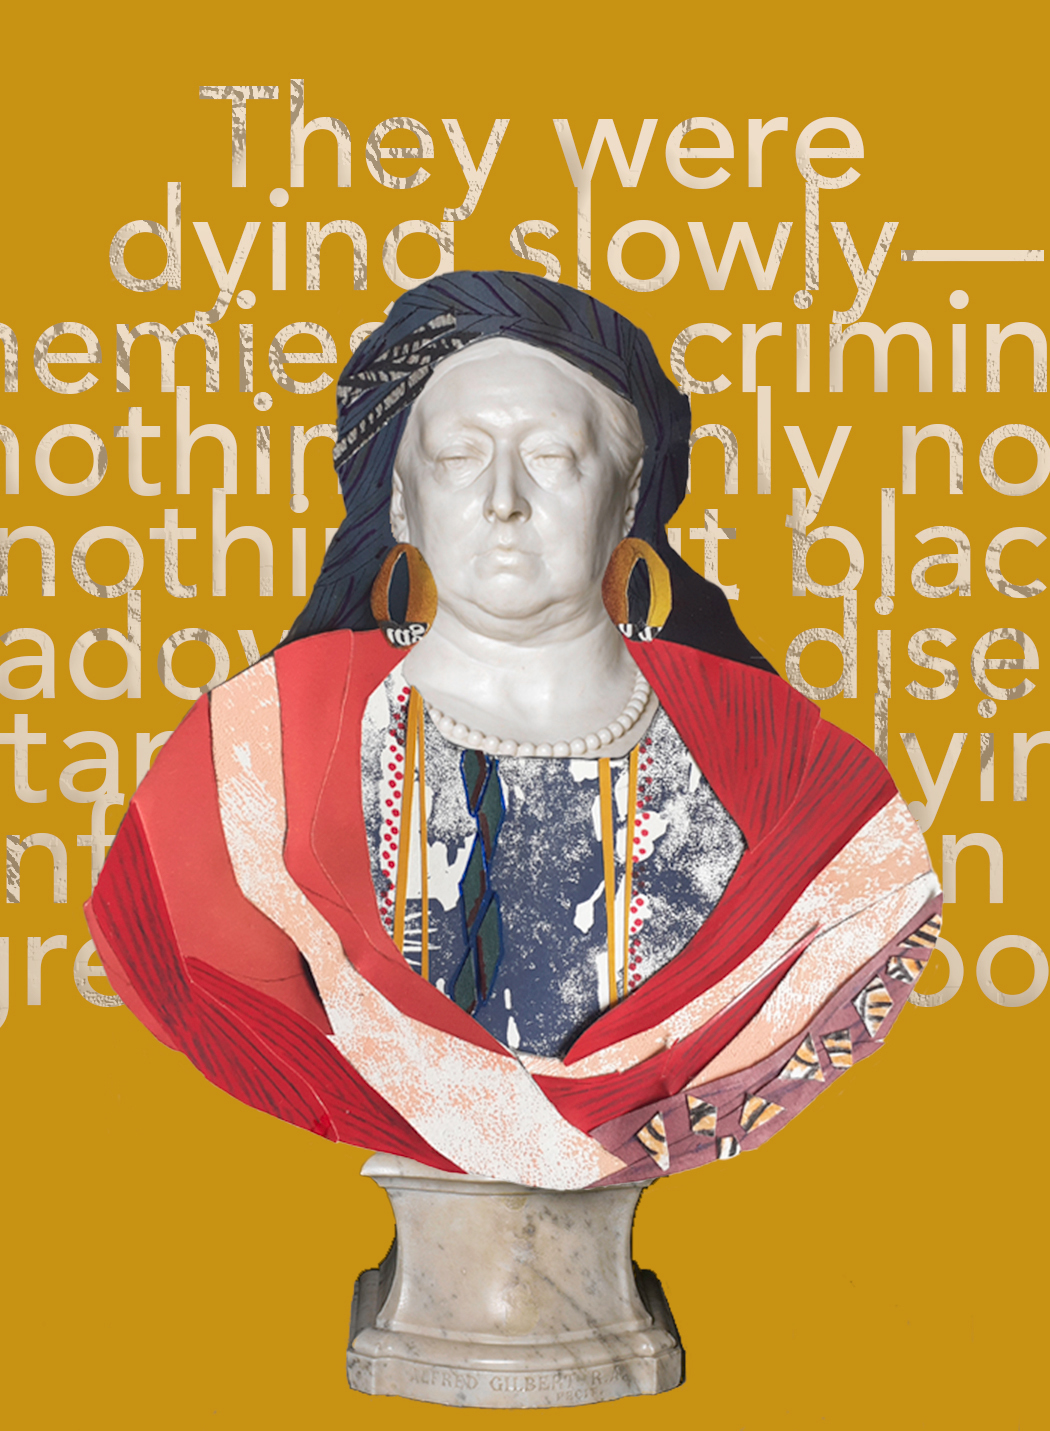 Collage based on the white marble bust of Queen Victoria. The background is mustard colour, with a quote from Joseph Conrad’s Heart of Darkness in white, clustered text. Most of the text is obscured by the bust in front of it, but at the top it’s possible to read: “They were dying slowly”. The white marble bust of the Queen shows her with a solemn expression and in late middle age, with wrinkles and a jowelly chin. The marble is bright white and shiny. She wears a purple headwrap and large gold hoop earrings. A patterned top with a round neckline and gold stripes is covered with a vivid red robe swirling round her shoulders. The marble base of the bust is visible beneath.